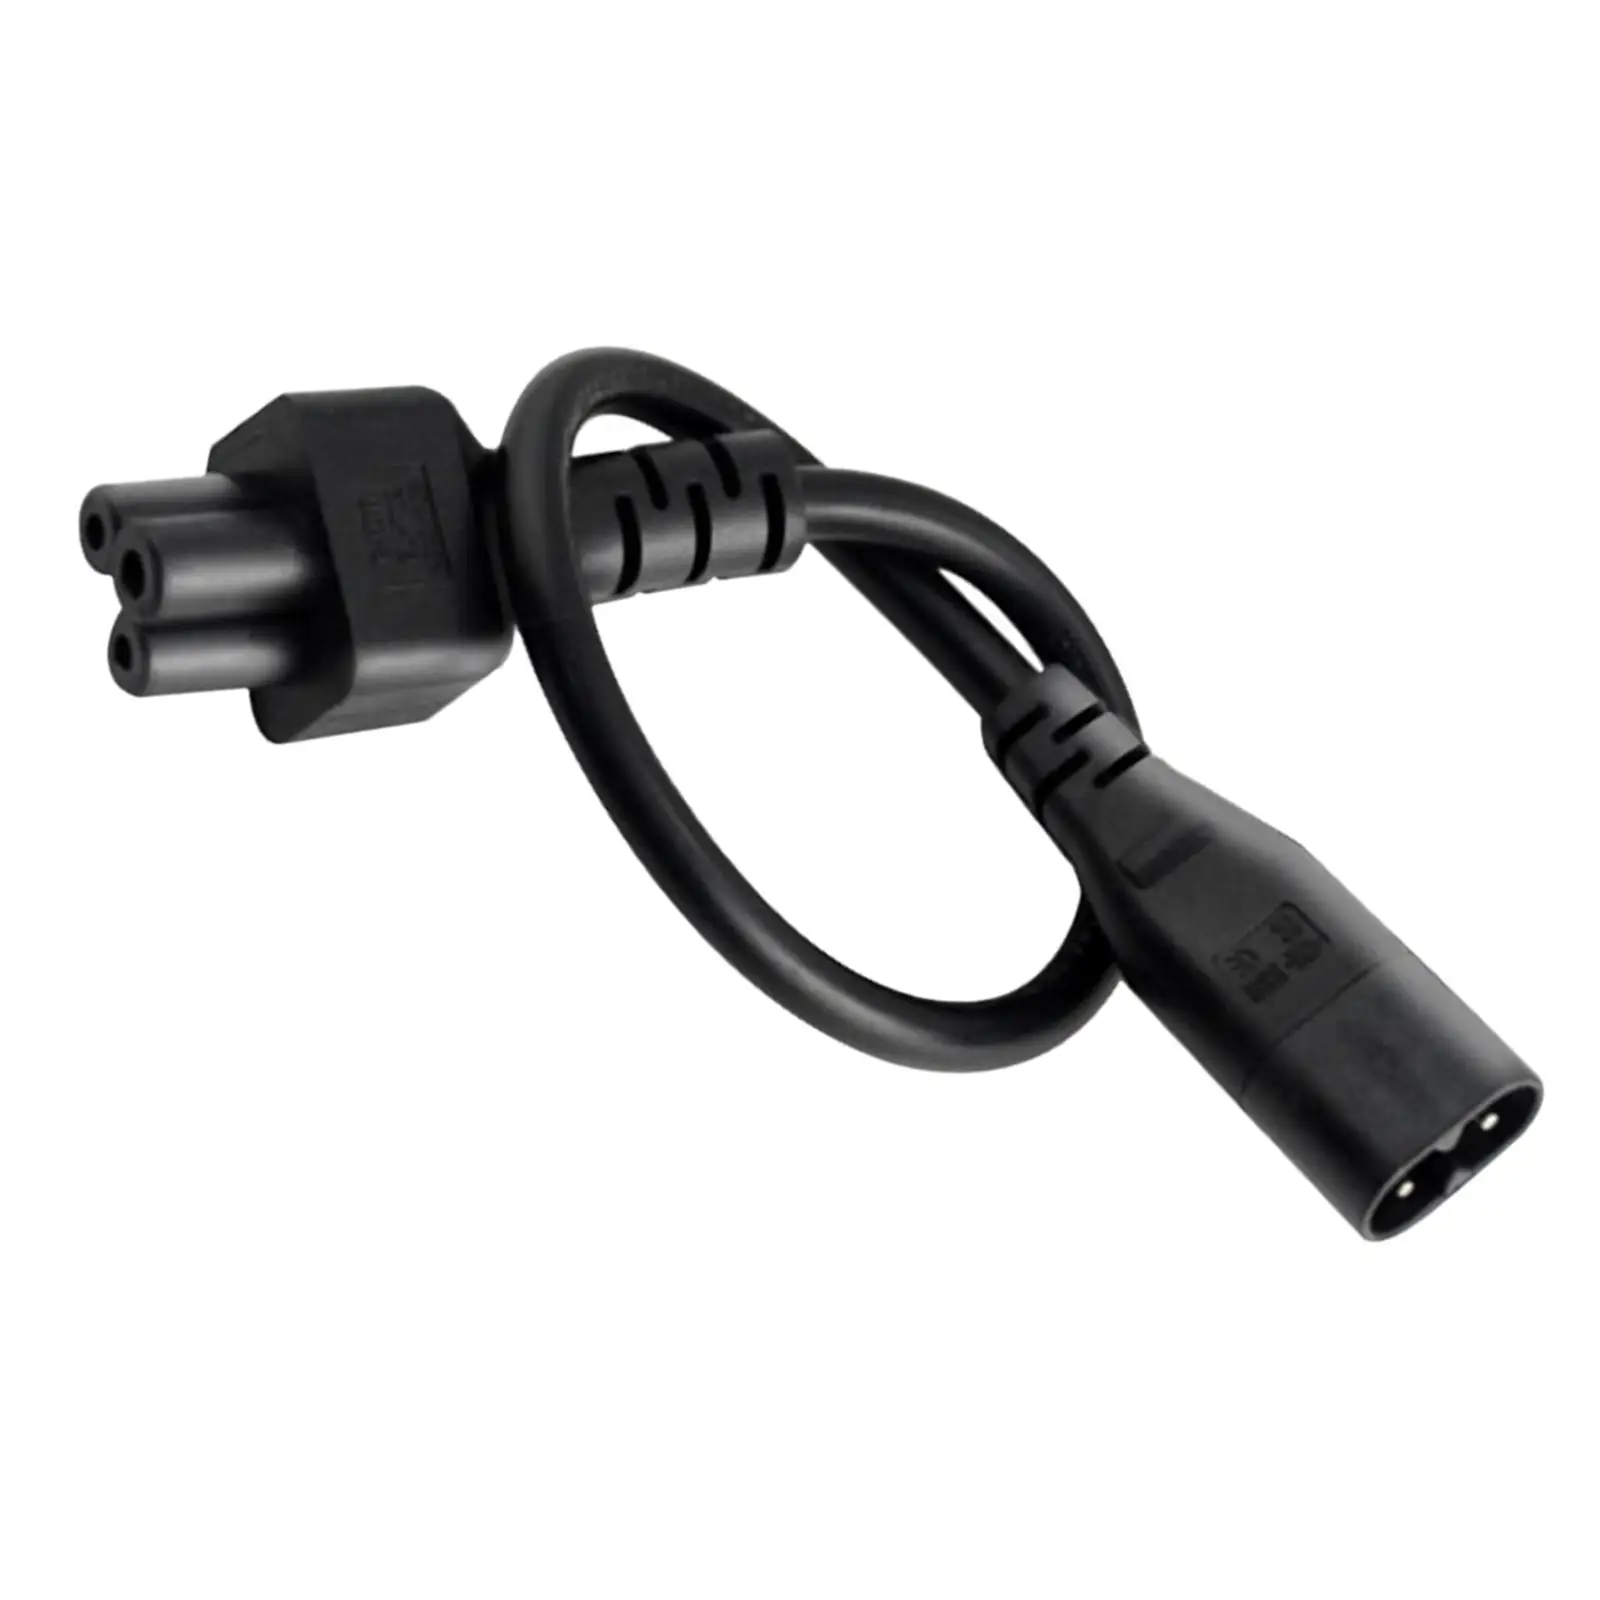 Flexible IEC320-C8 to IEC320-Power Adapter Cable 2 Pin to 3 Pin Extension Cord for